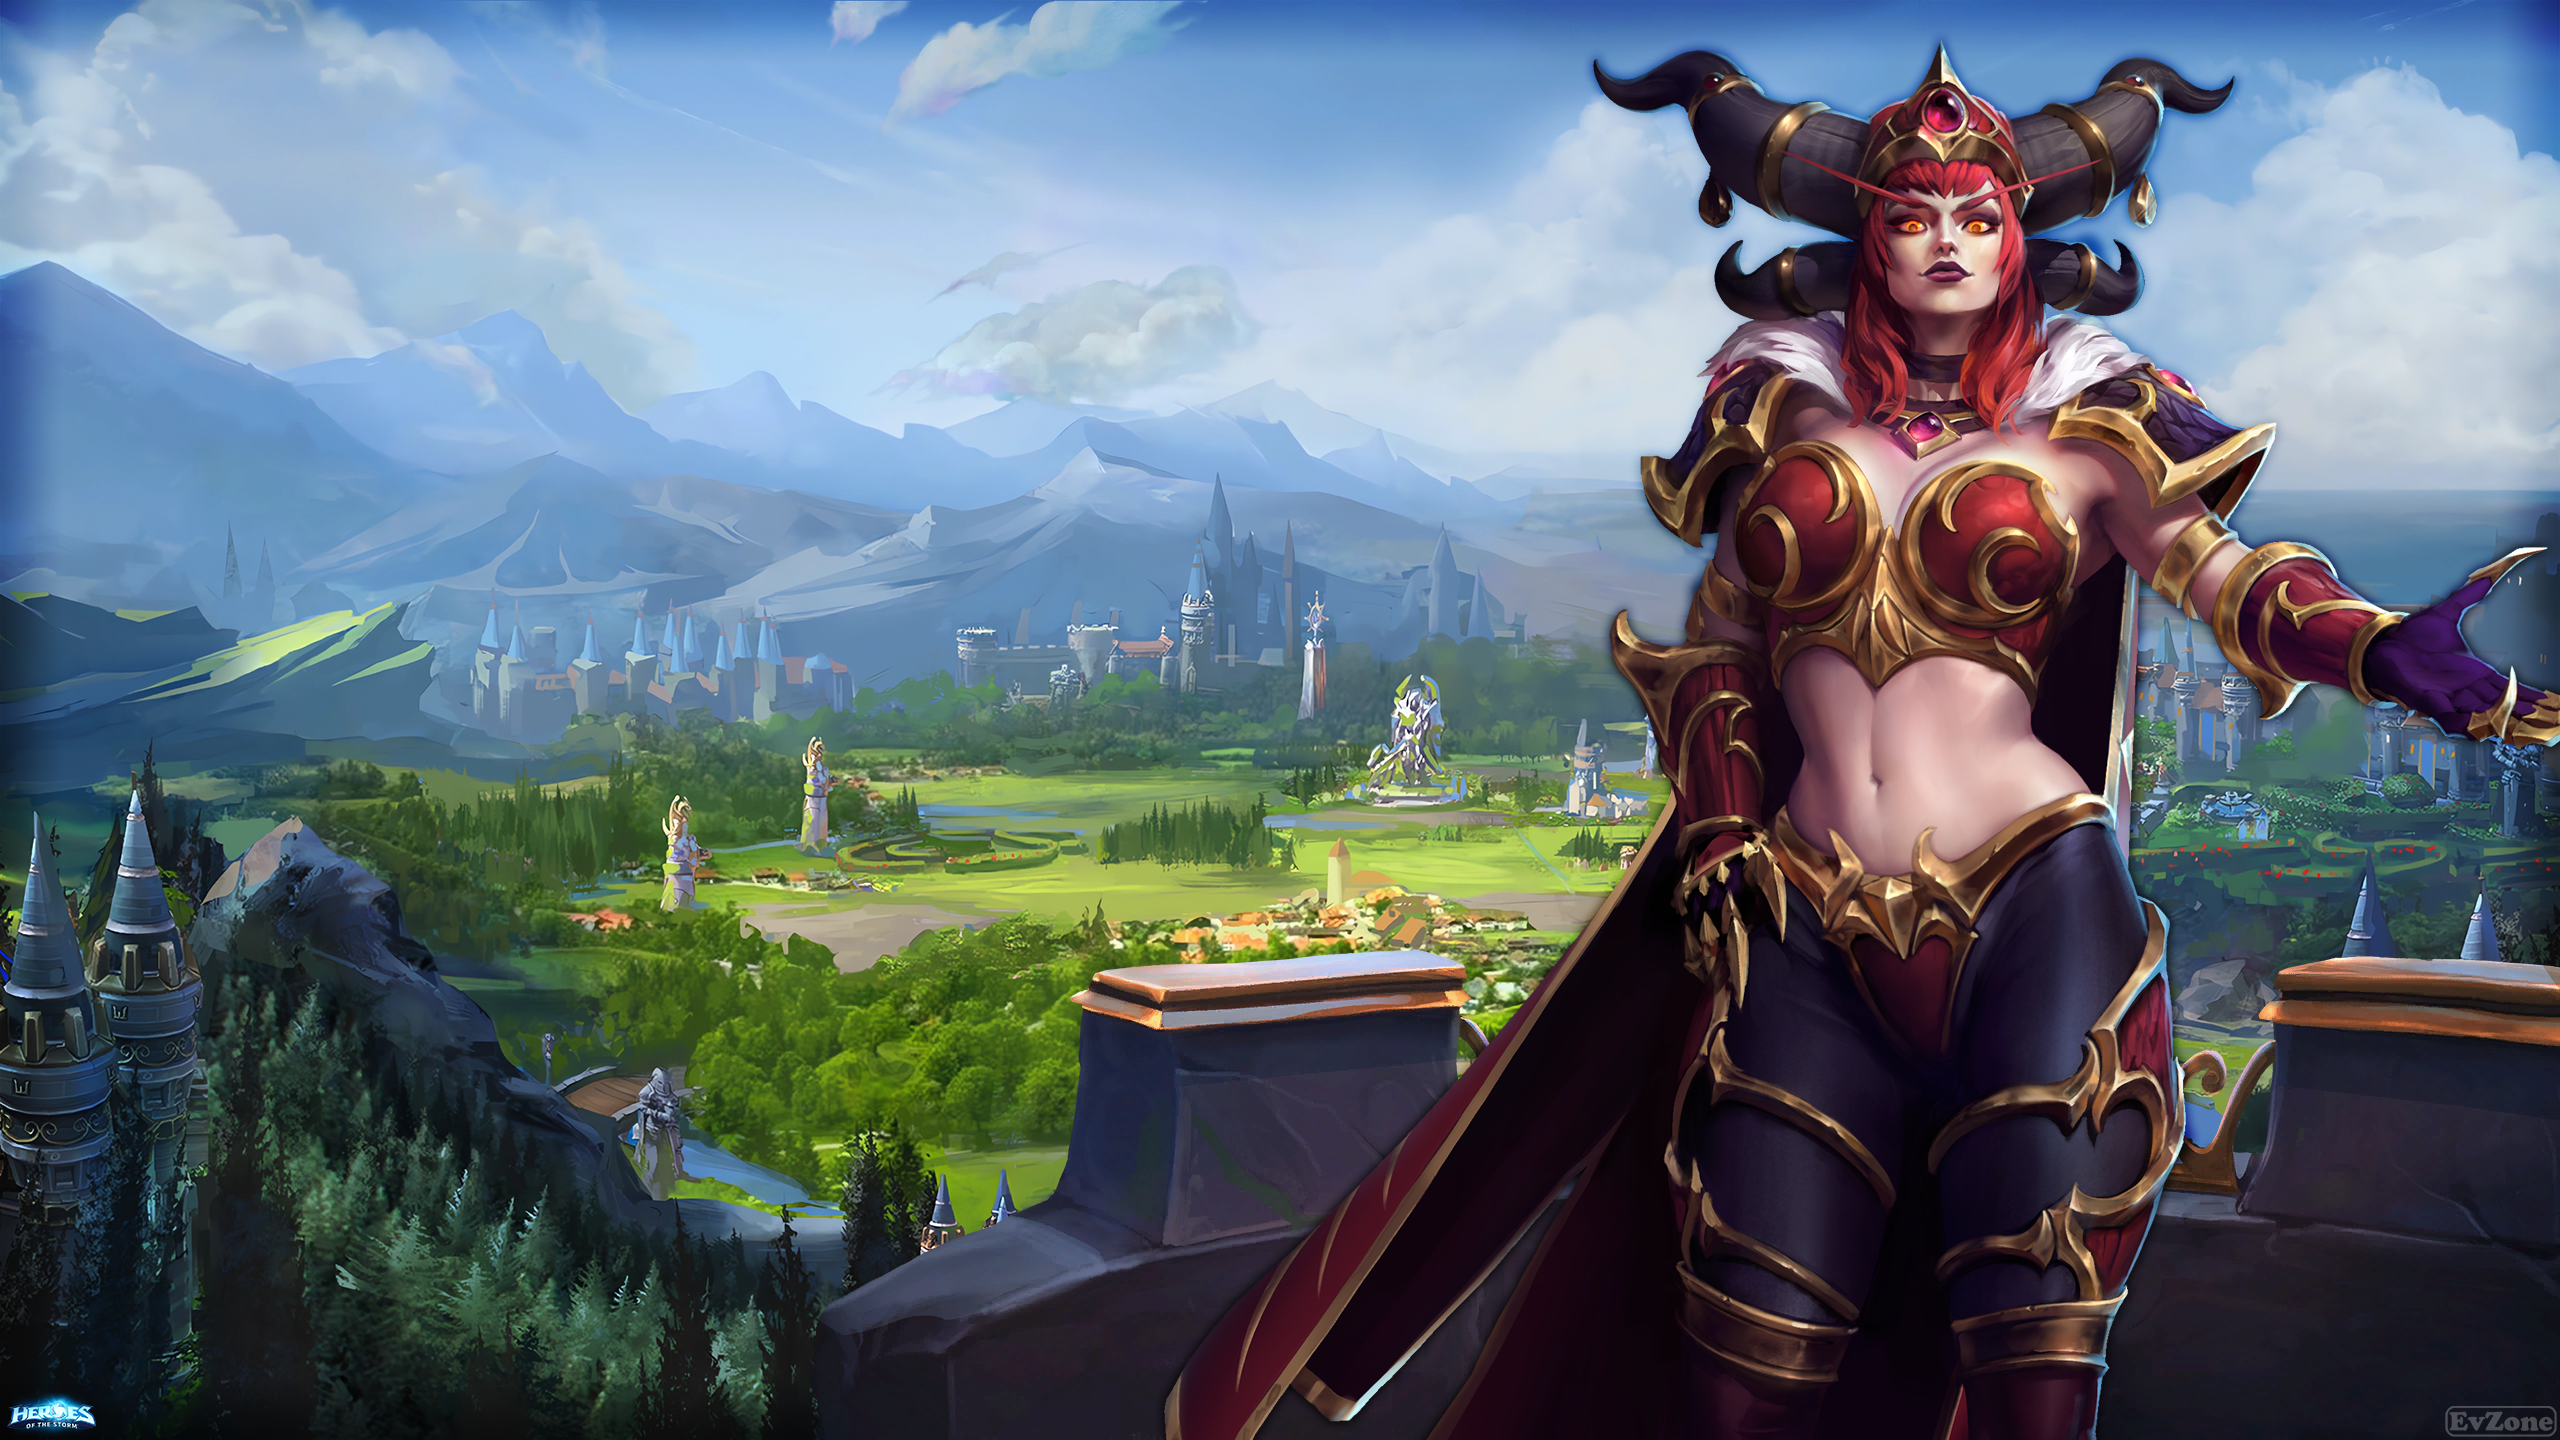 General 2560x1440 Heroes of the Storm Alexstrasza digital art watermarked clouds looking at viewer sky armor horns belly belly button standing landscape mountains trees claws redhead smiling closed mouth